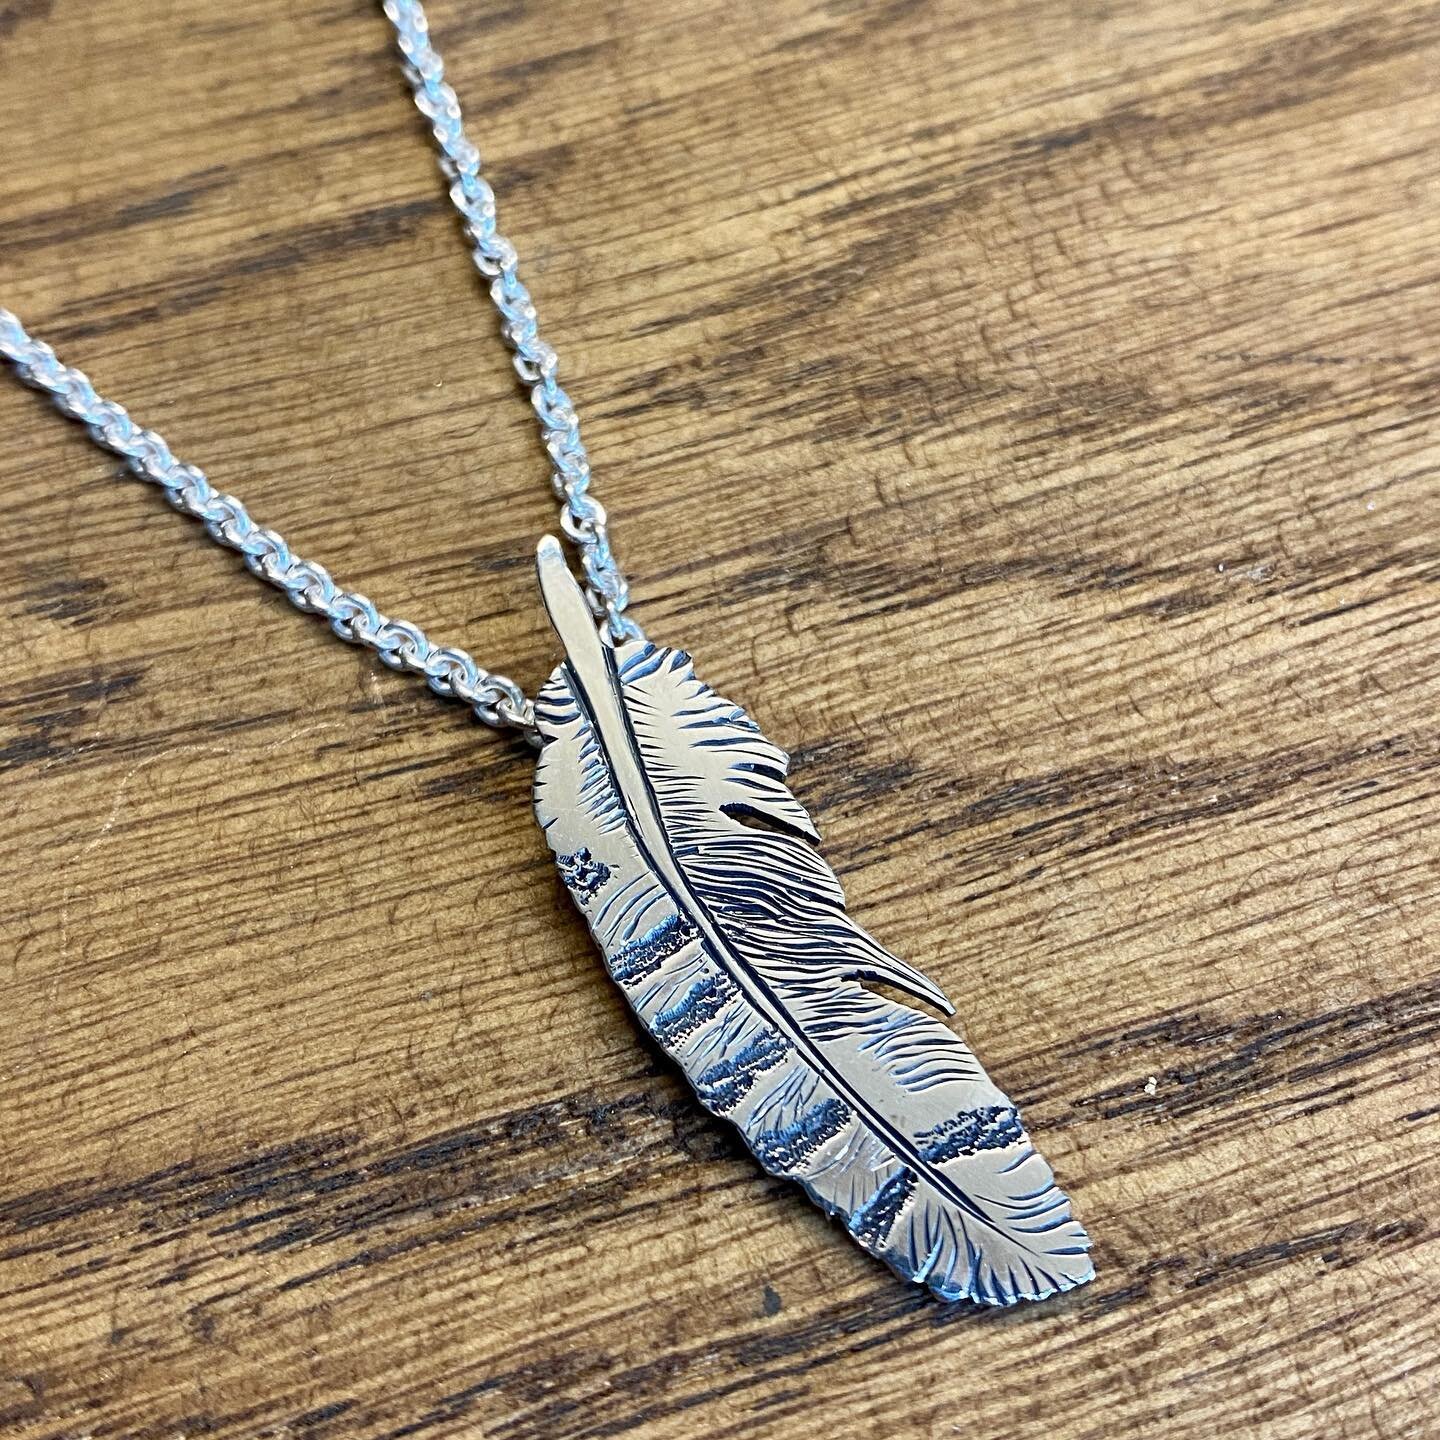 A jays feather necklace I made for a friend recently. Always enjoy making things that I know have a personal meaning for the recipient.
Sterling silver. 

#sterlingsilver #jewelery #jewellery #jeweler #silverjewelry #pendant #gemstones #gold #silver 